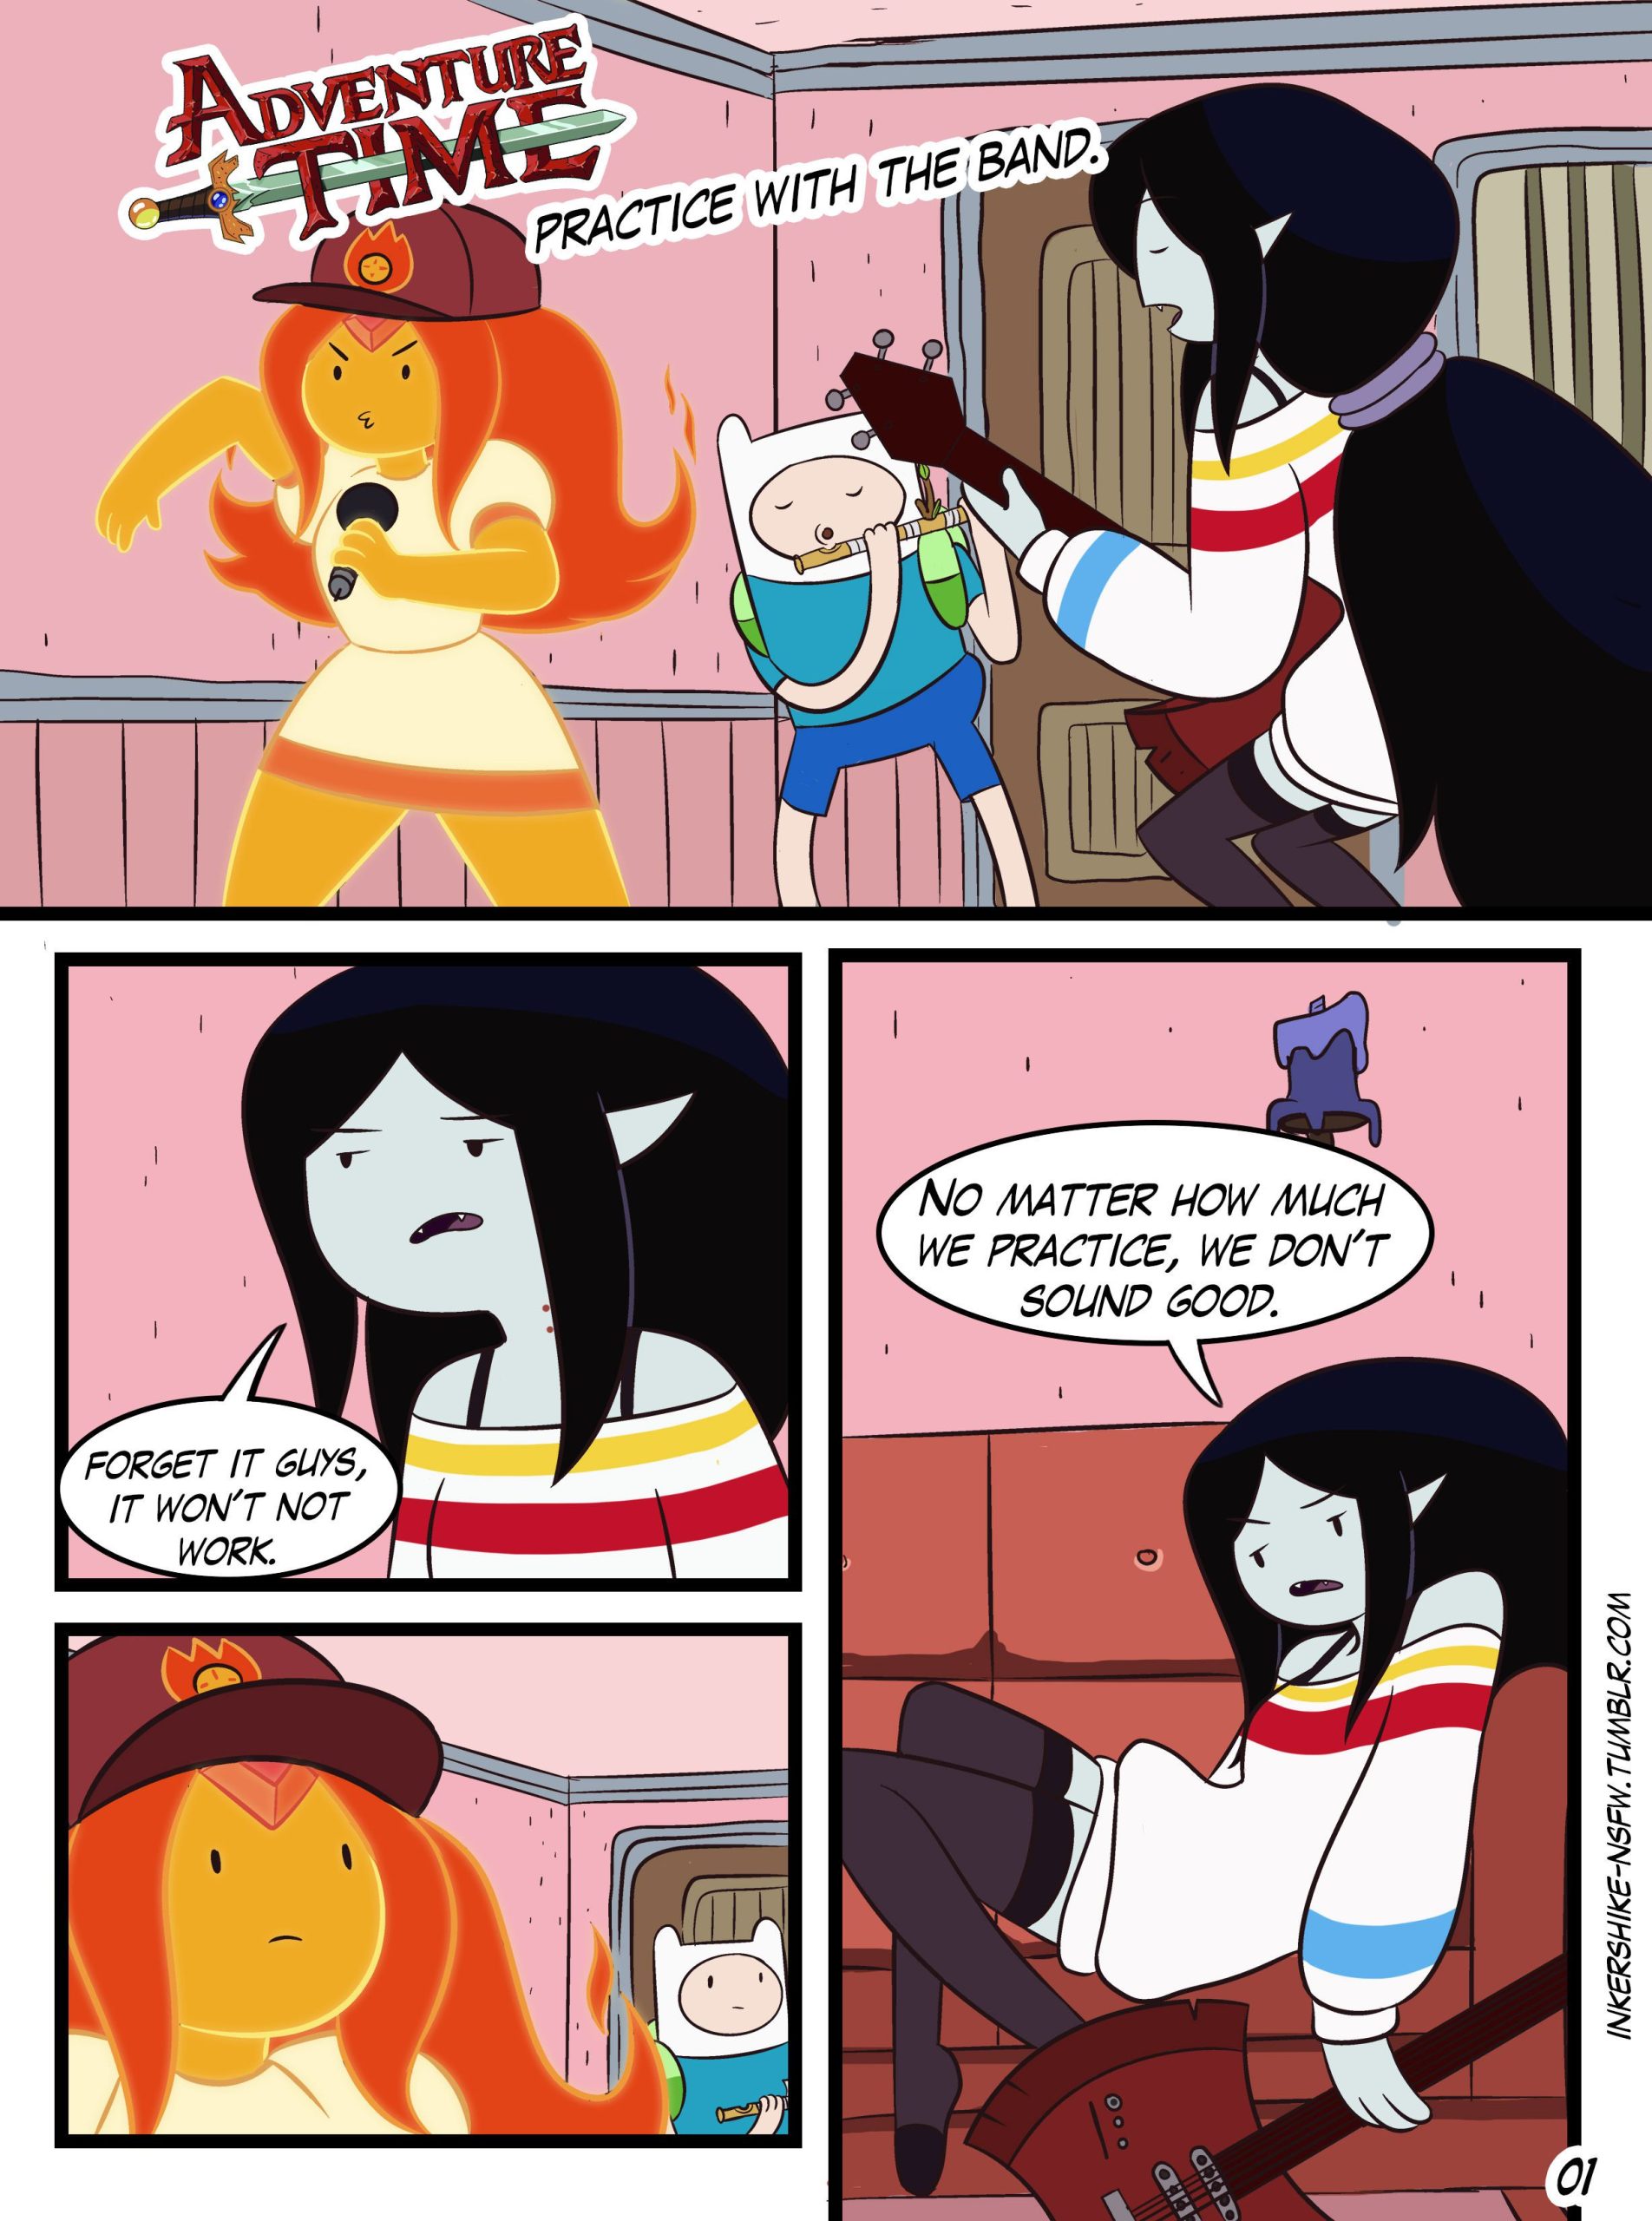 Adventure time practice with the band porn comic